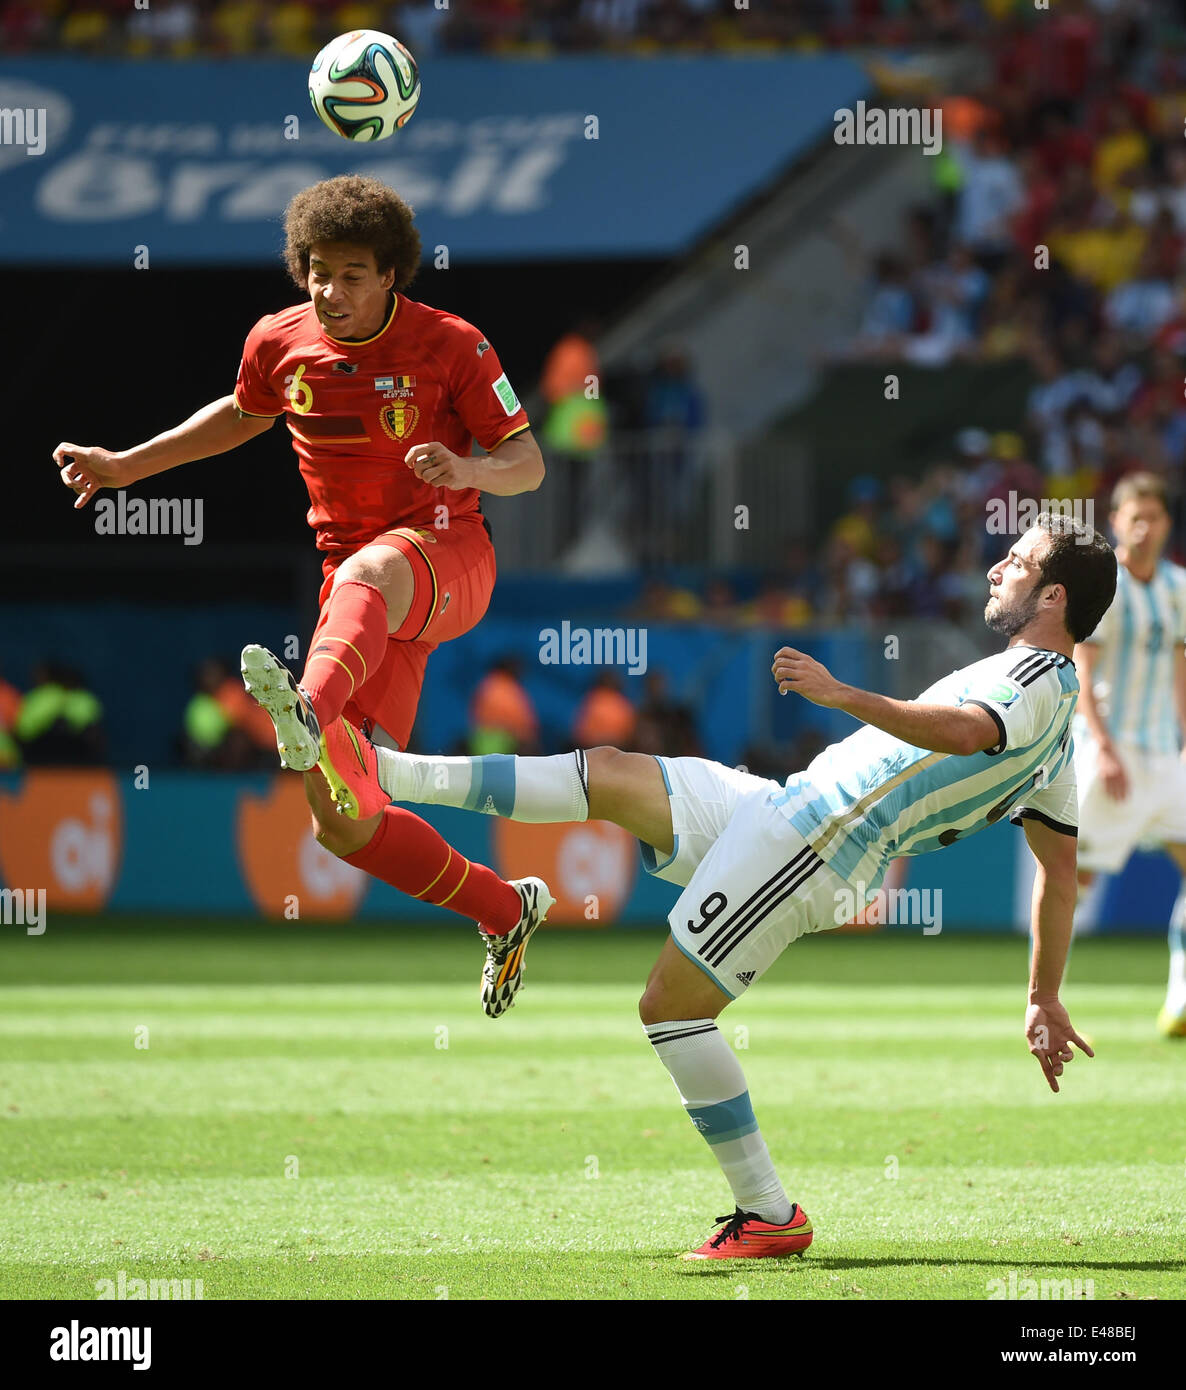 Brasilia, Brazil. 5th July, 2014. Argentina's Gonzalo Higuain vies with Belgium's Axel Witsel during a quarter-finals match between Argentina and Belgium of 2014 FIFA World Cup at the Estadio Nacional Stadium in Brasilia, Brazil, on July 5, 2014. Credit:  Liu Dawei/Xinhua/Alamy Live News Stock Photo